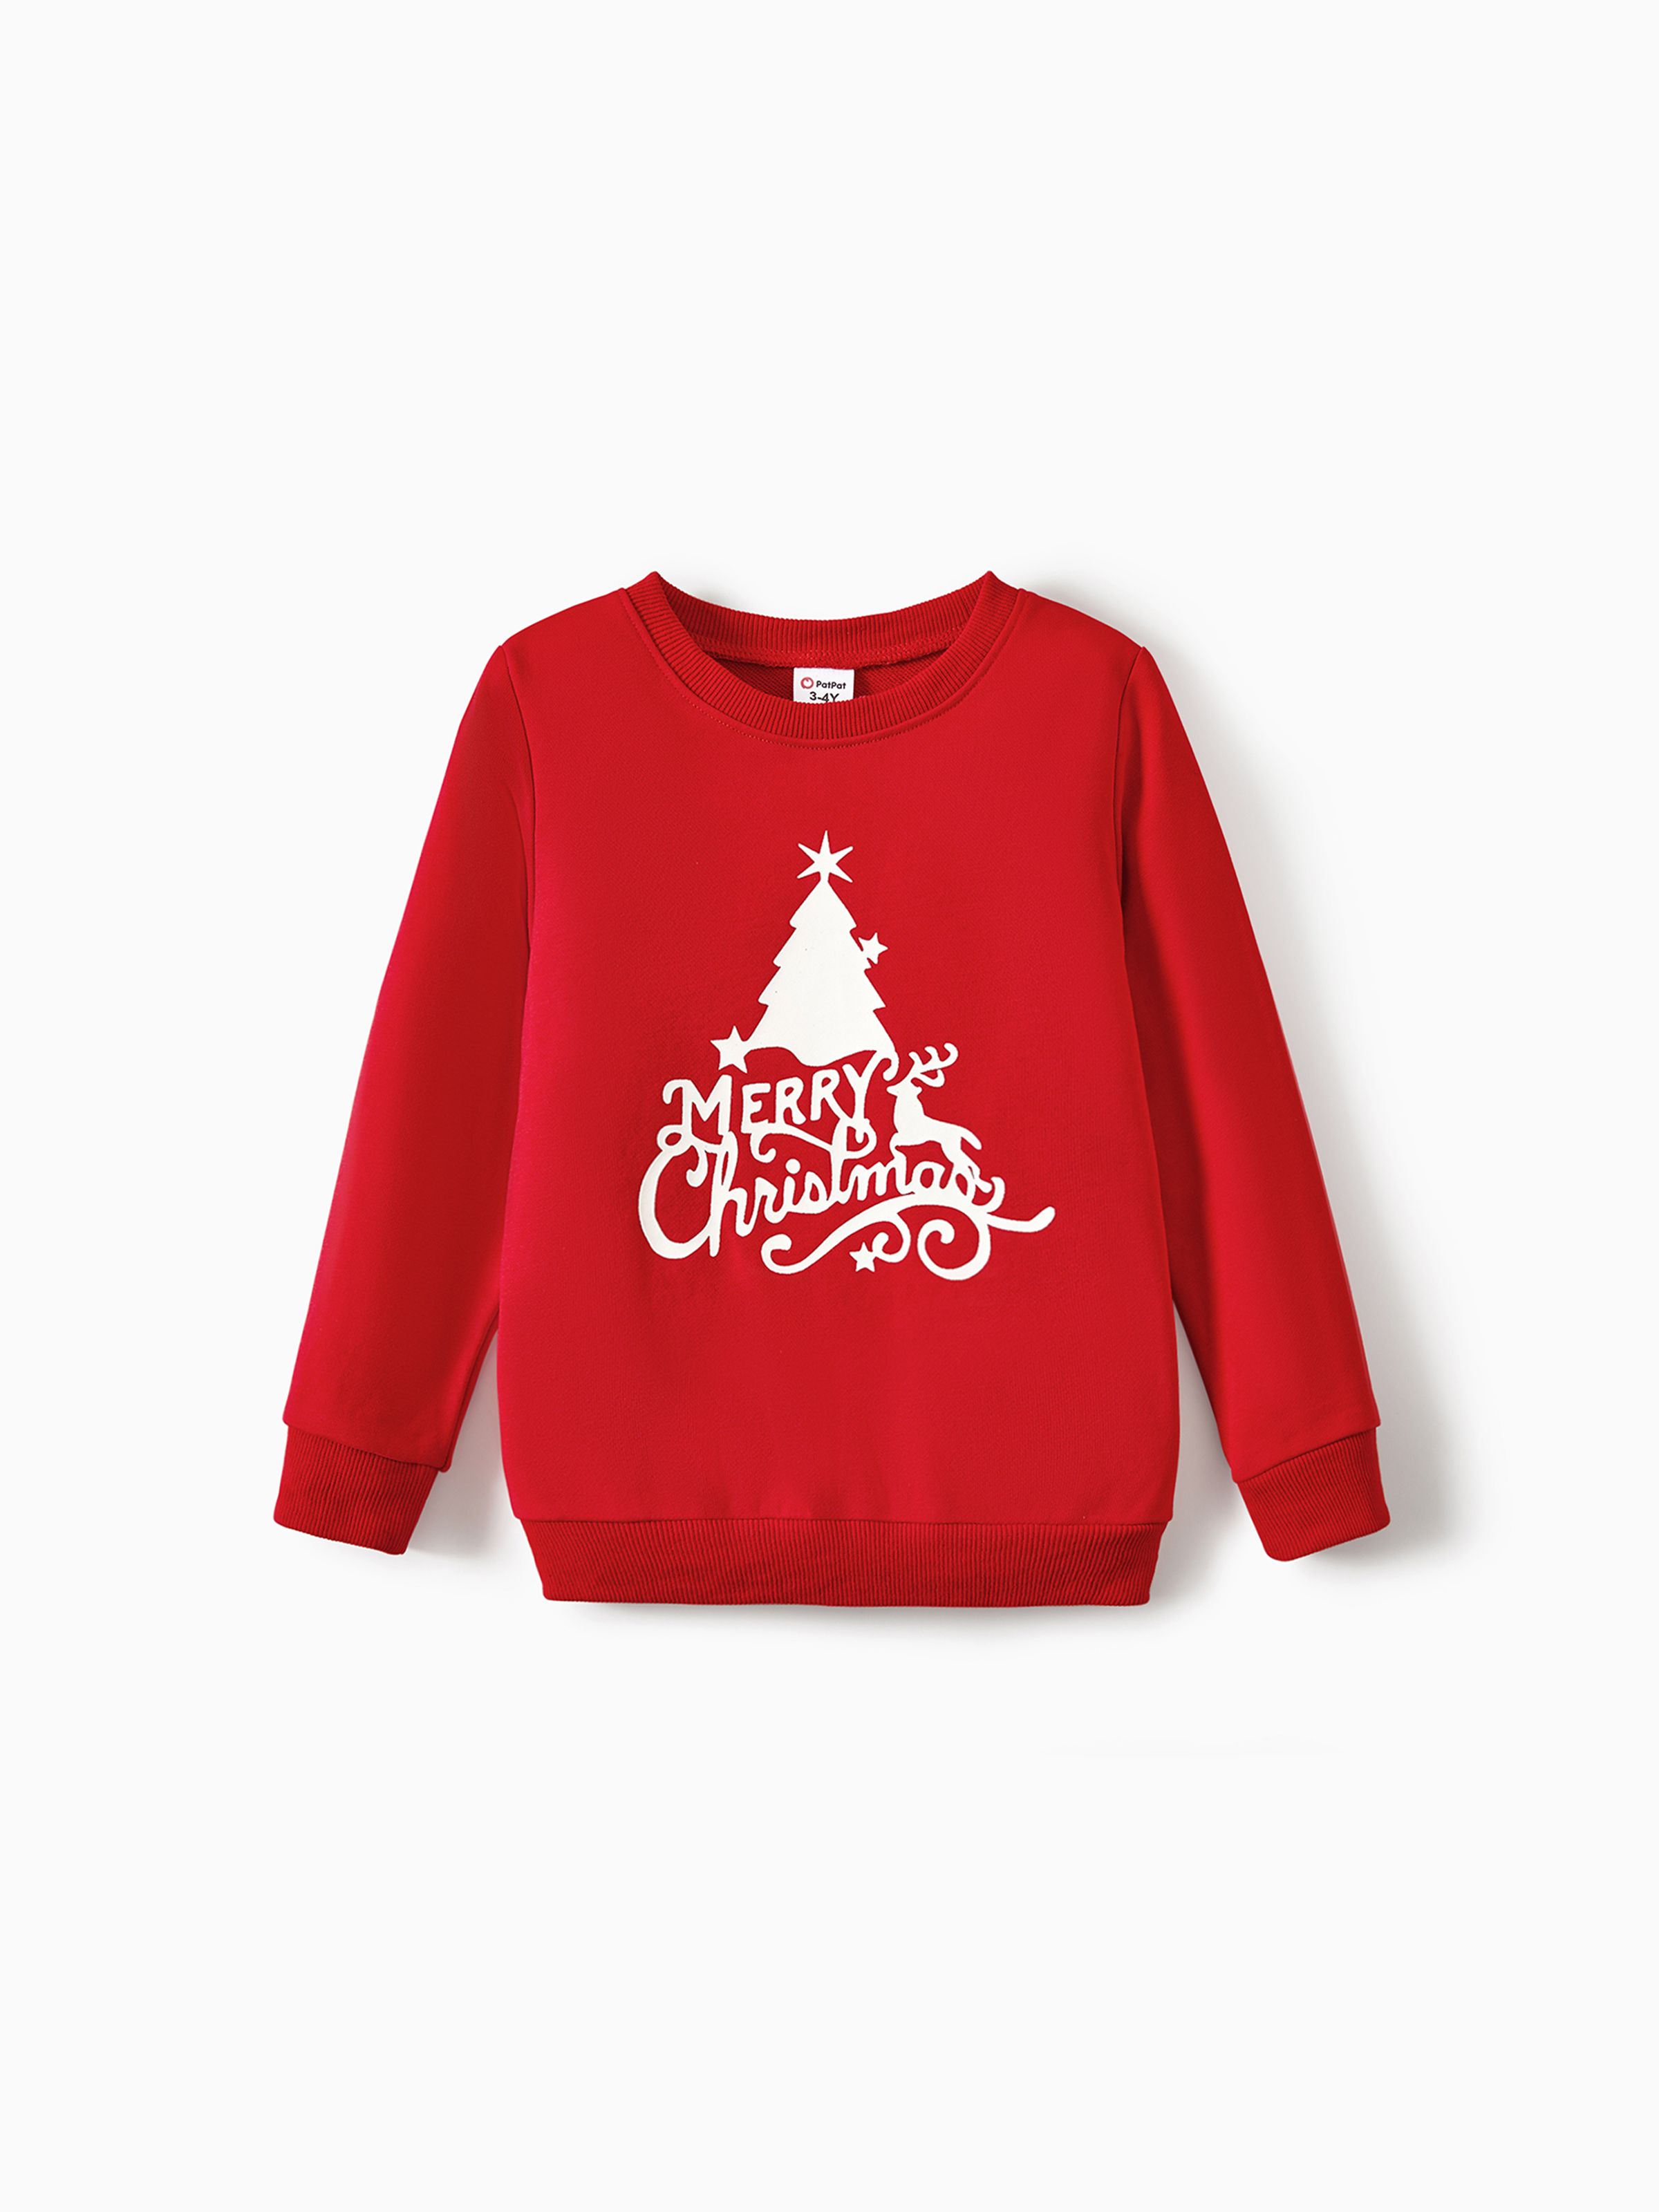 

Christmas Family Matching Glow In The Dark Letters Print Long-sleeve Casual Tops